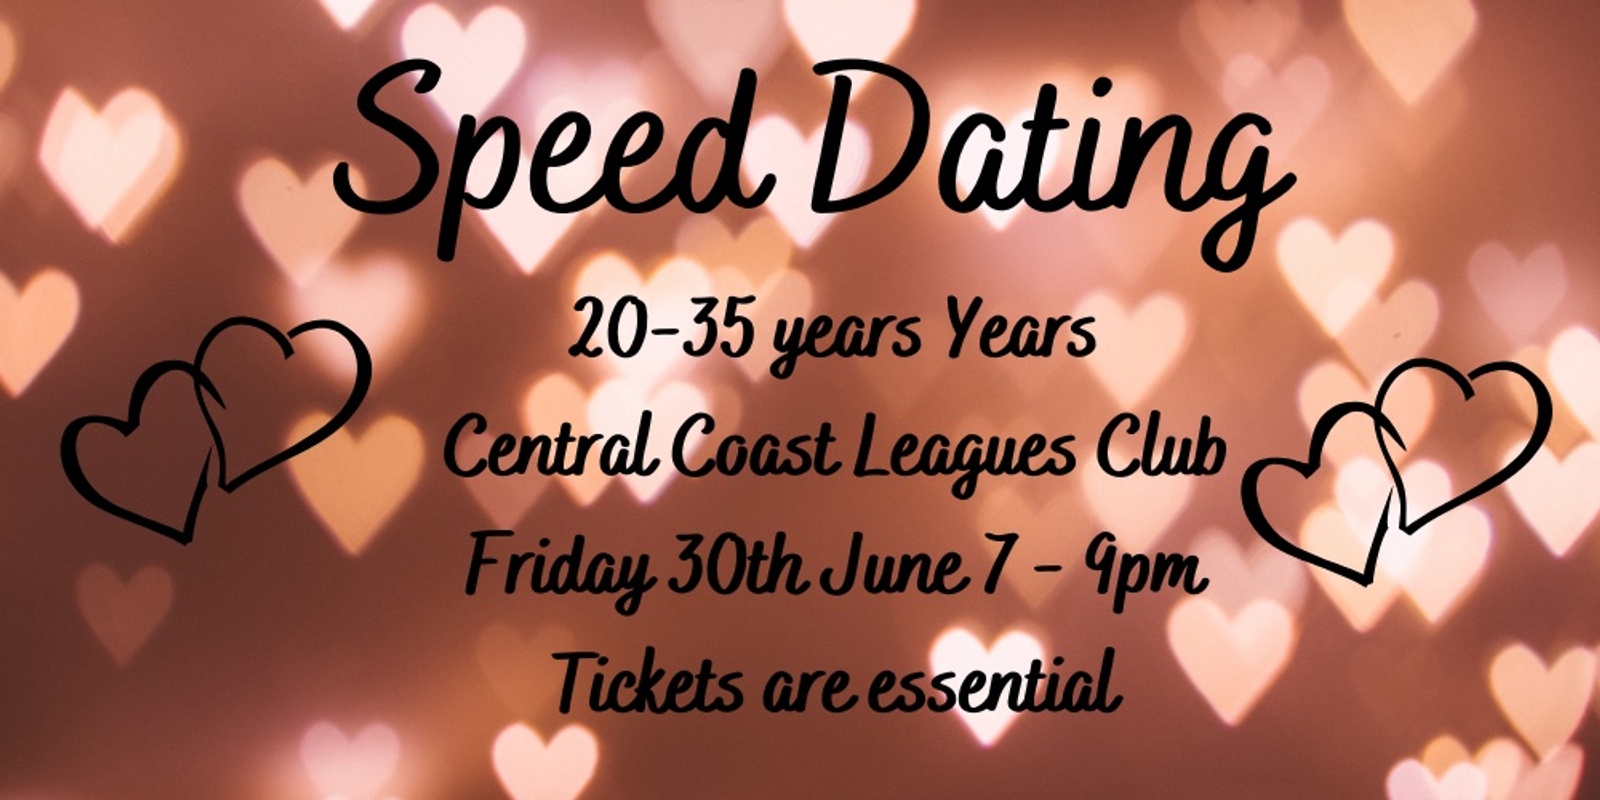 20-35 years Speed Dating